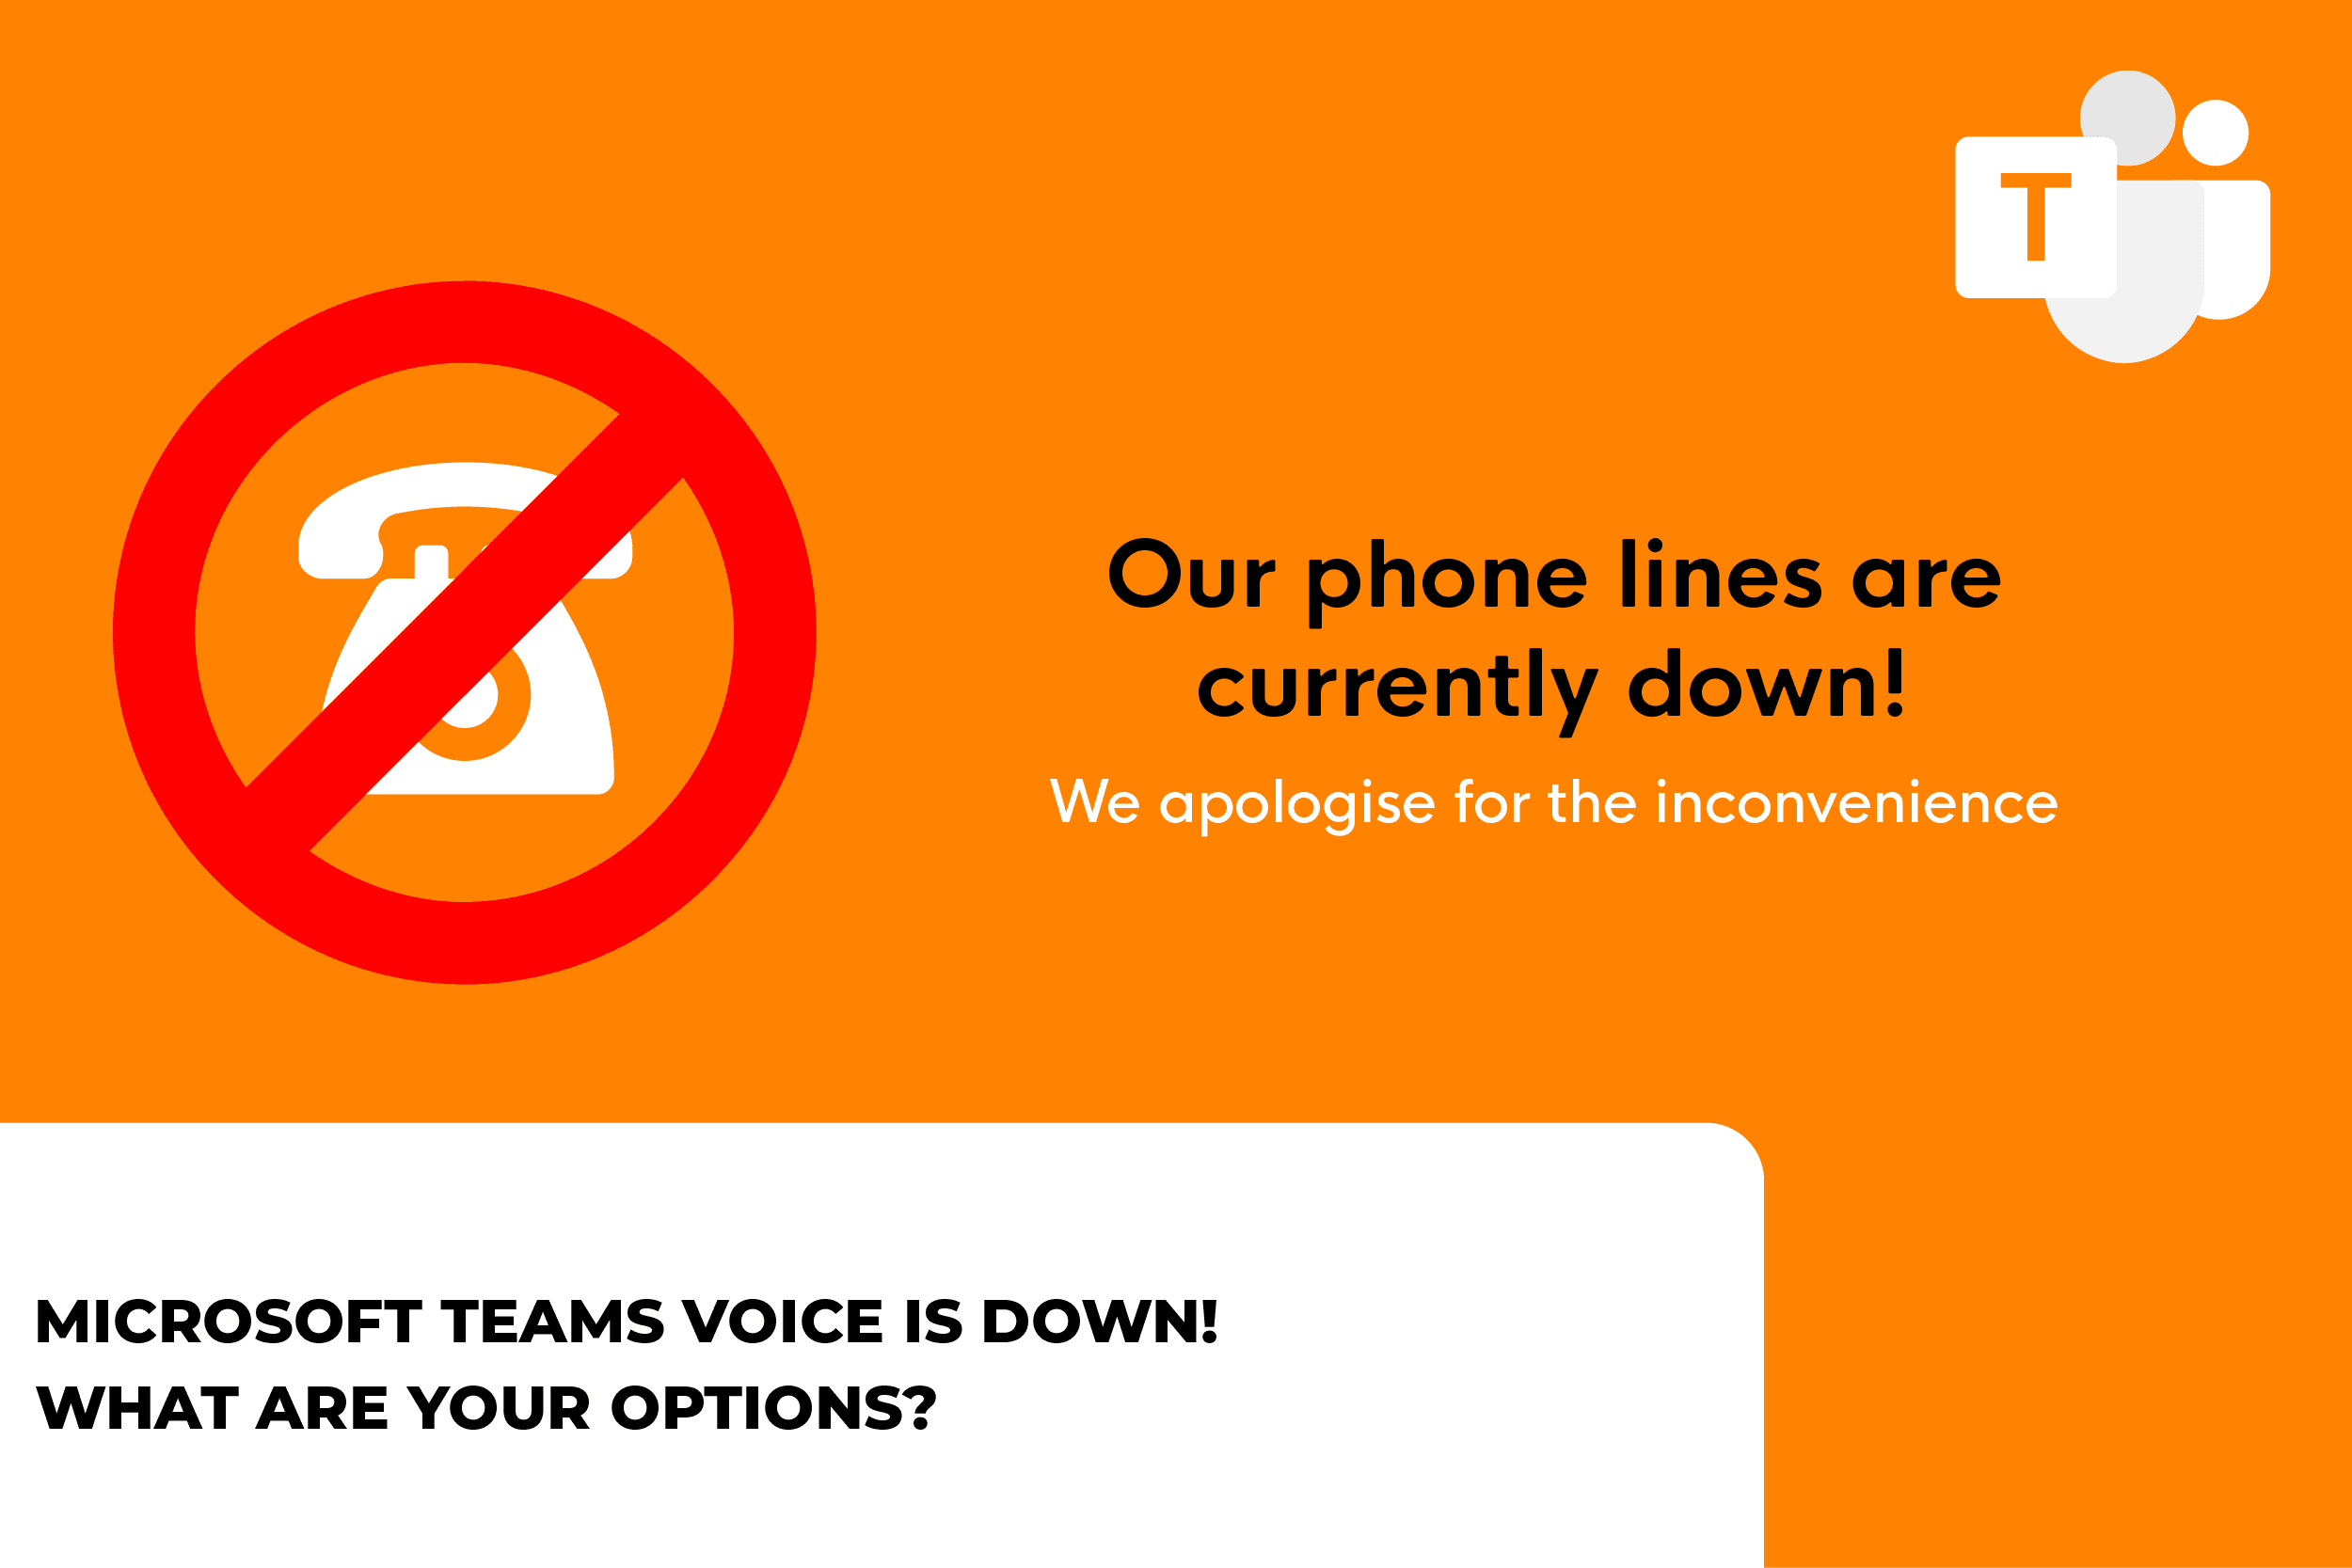 microsoft teams voice is down. What are your options?